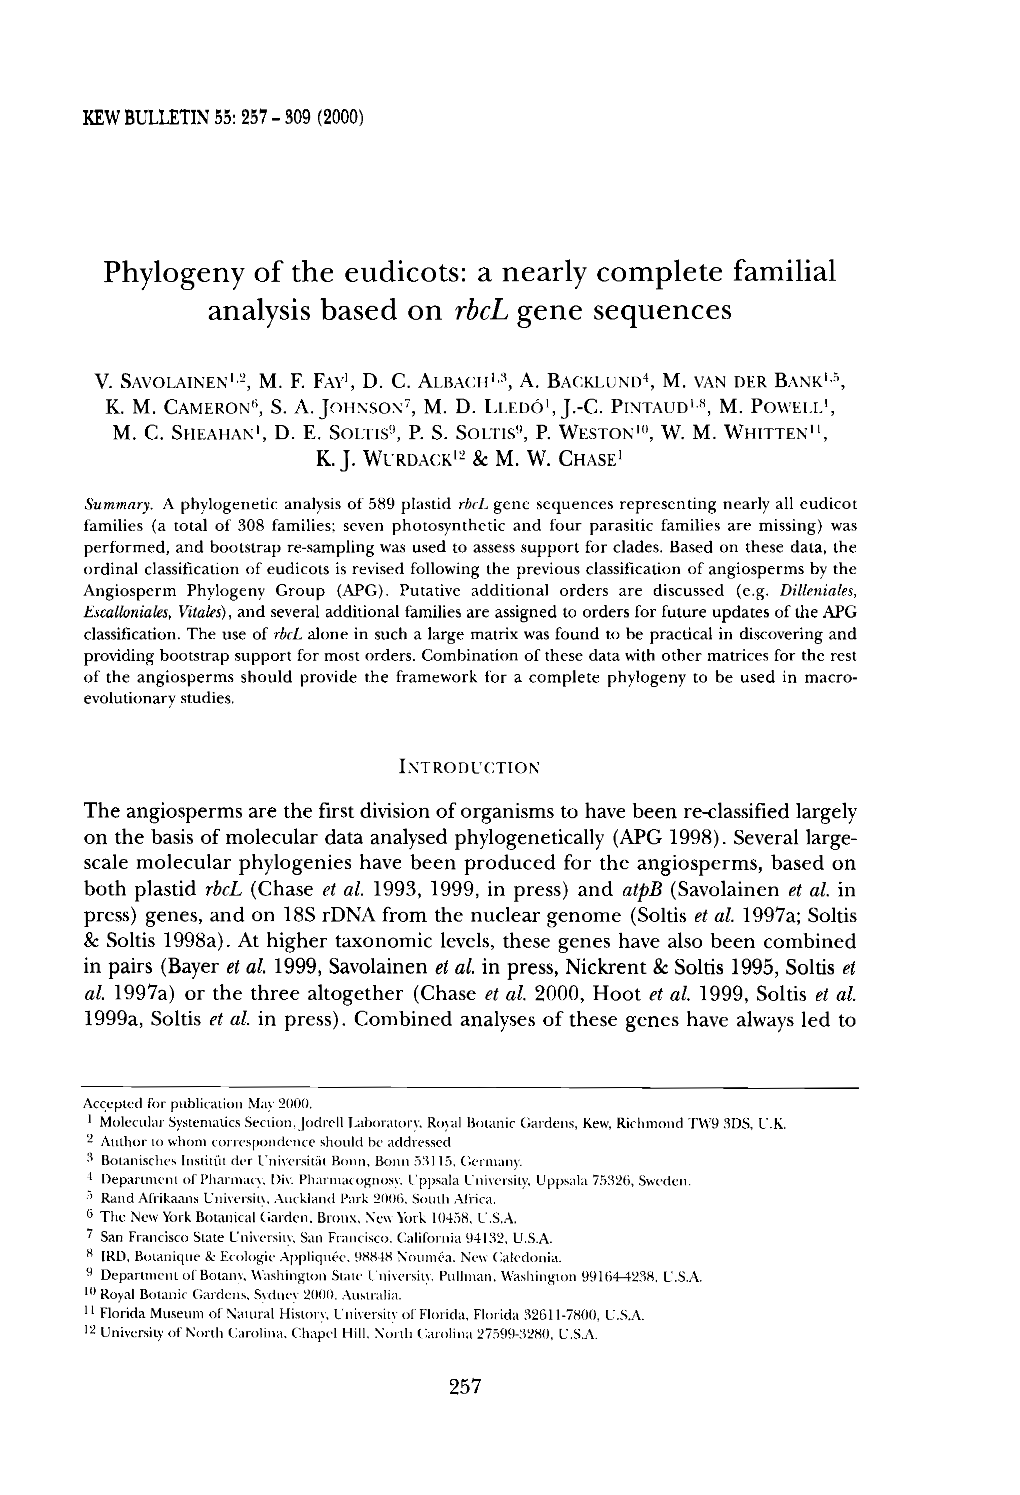 Phylogeny of the Eudicots : a Nearly Complete Familial Analysis Based On